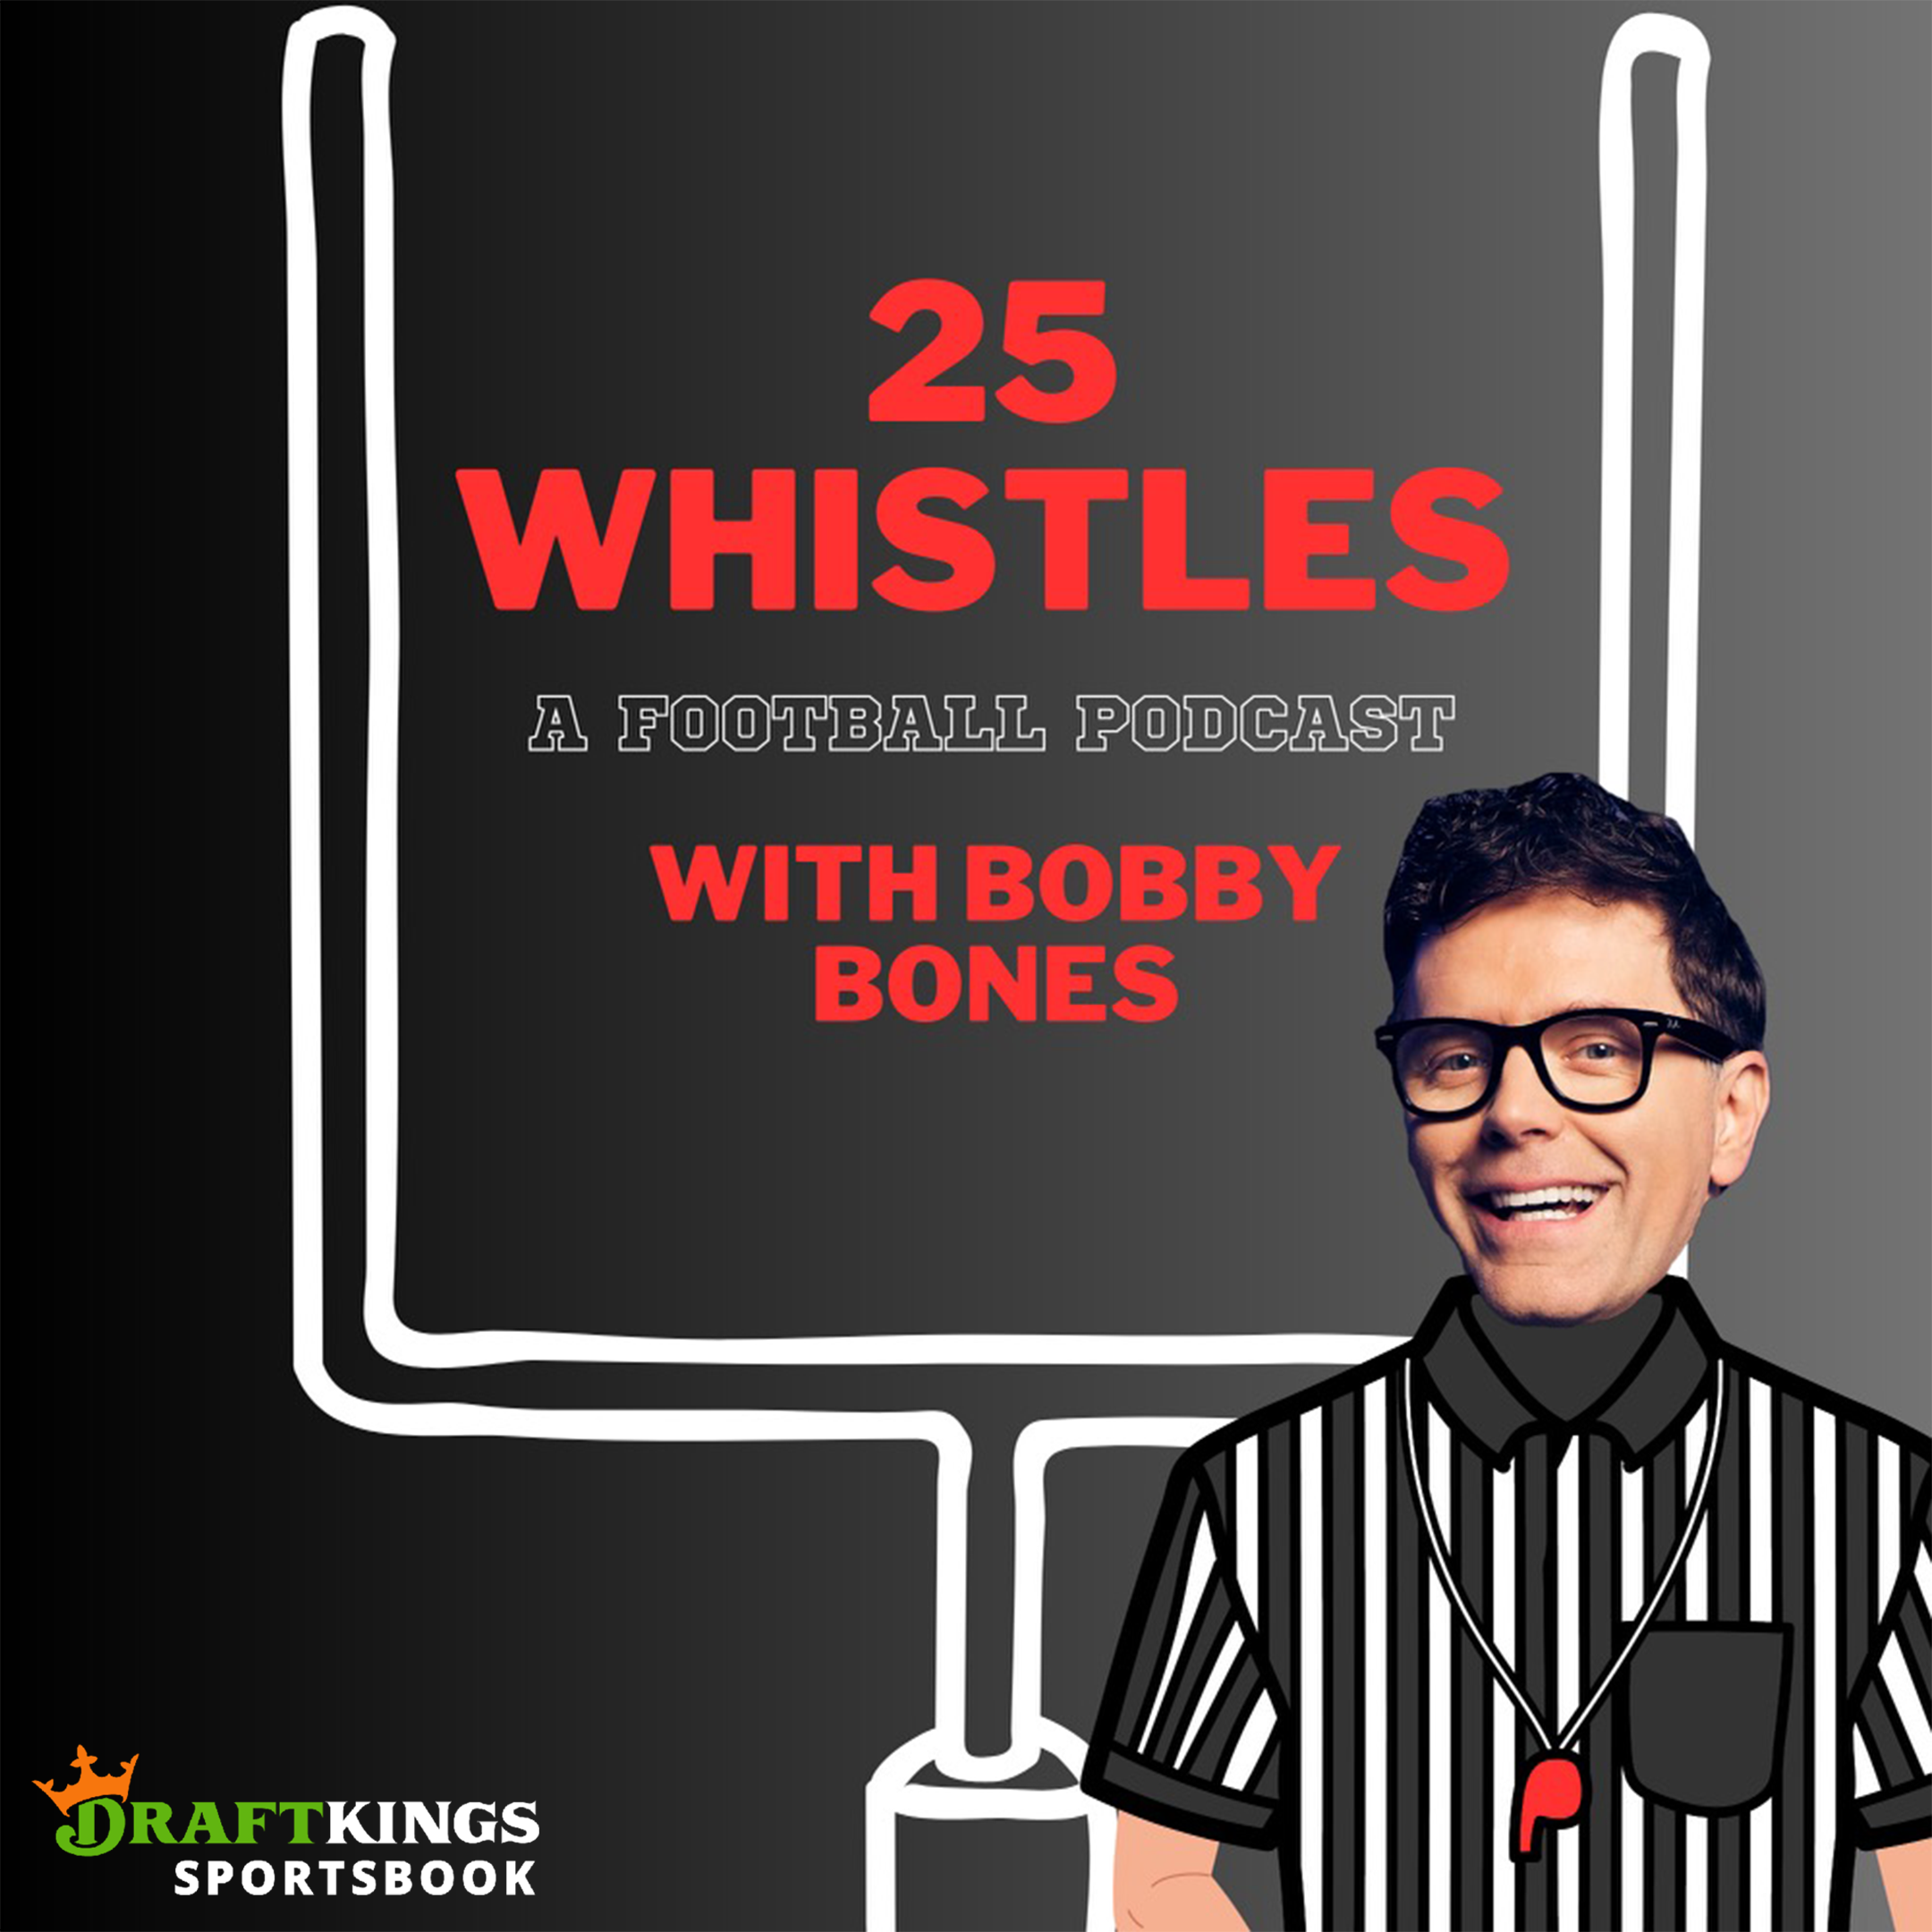 25W: We Have Possibly Blown our Final Whistle + Super Bowl 58 Preview + 2X Super Bowl Champion Tony Casillas + Our Visit to Wichita with Wichita State Men's Basketball